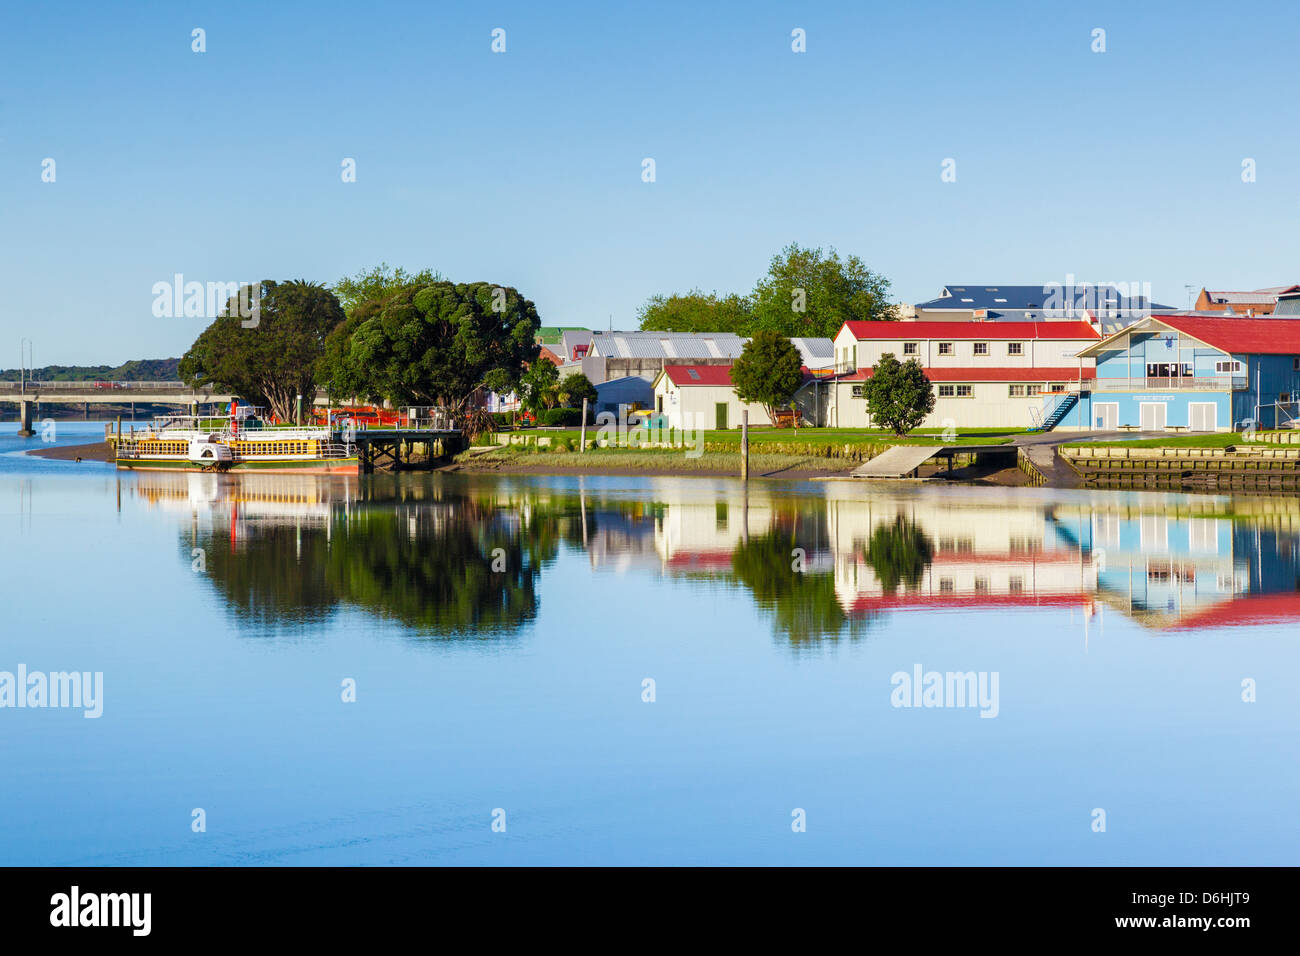 The Wanganui or Whanganui River in the early morning, with the paddle steamer 'Waimarie' and riverside buildings. Stock Photo